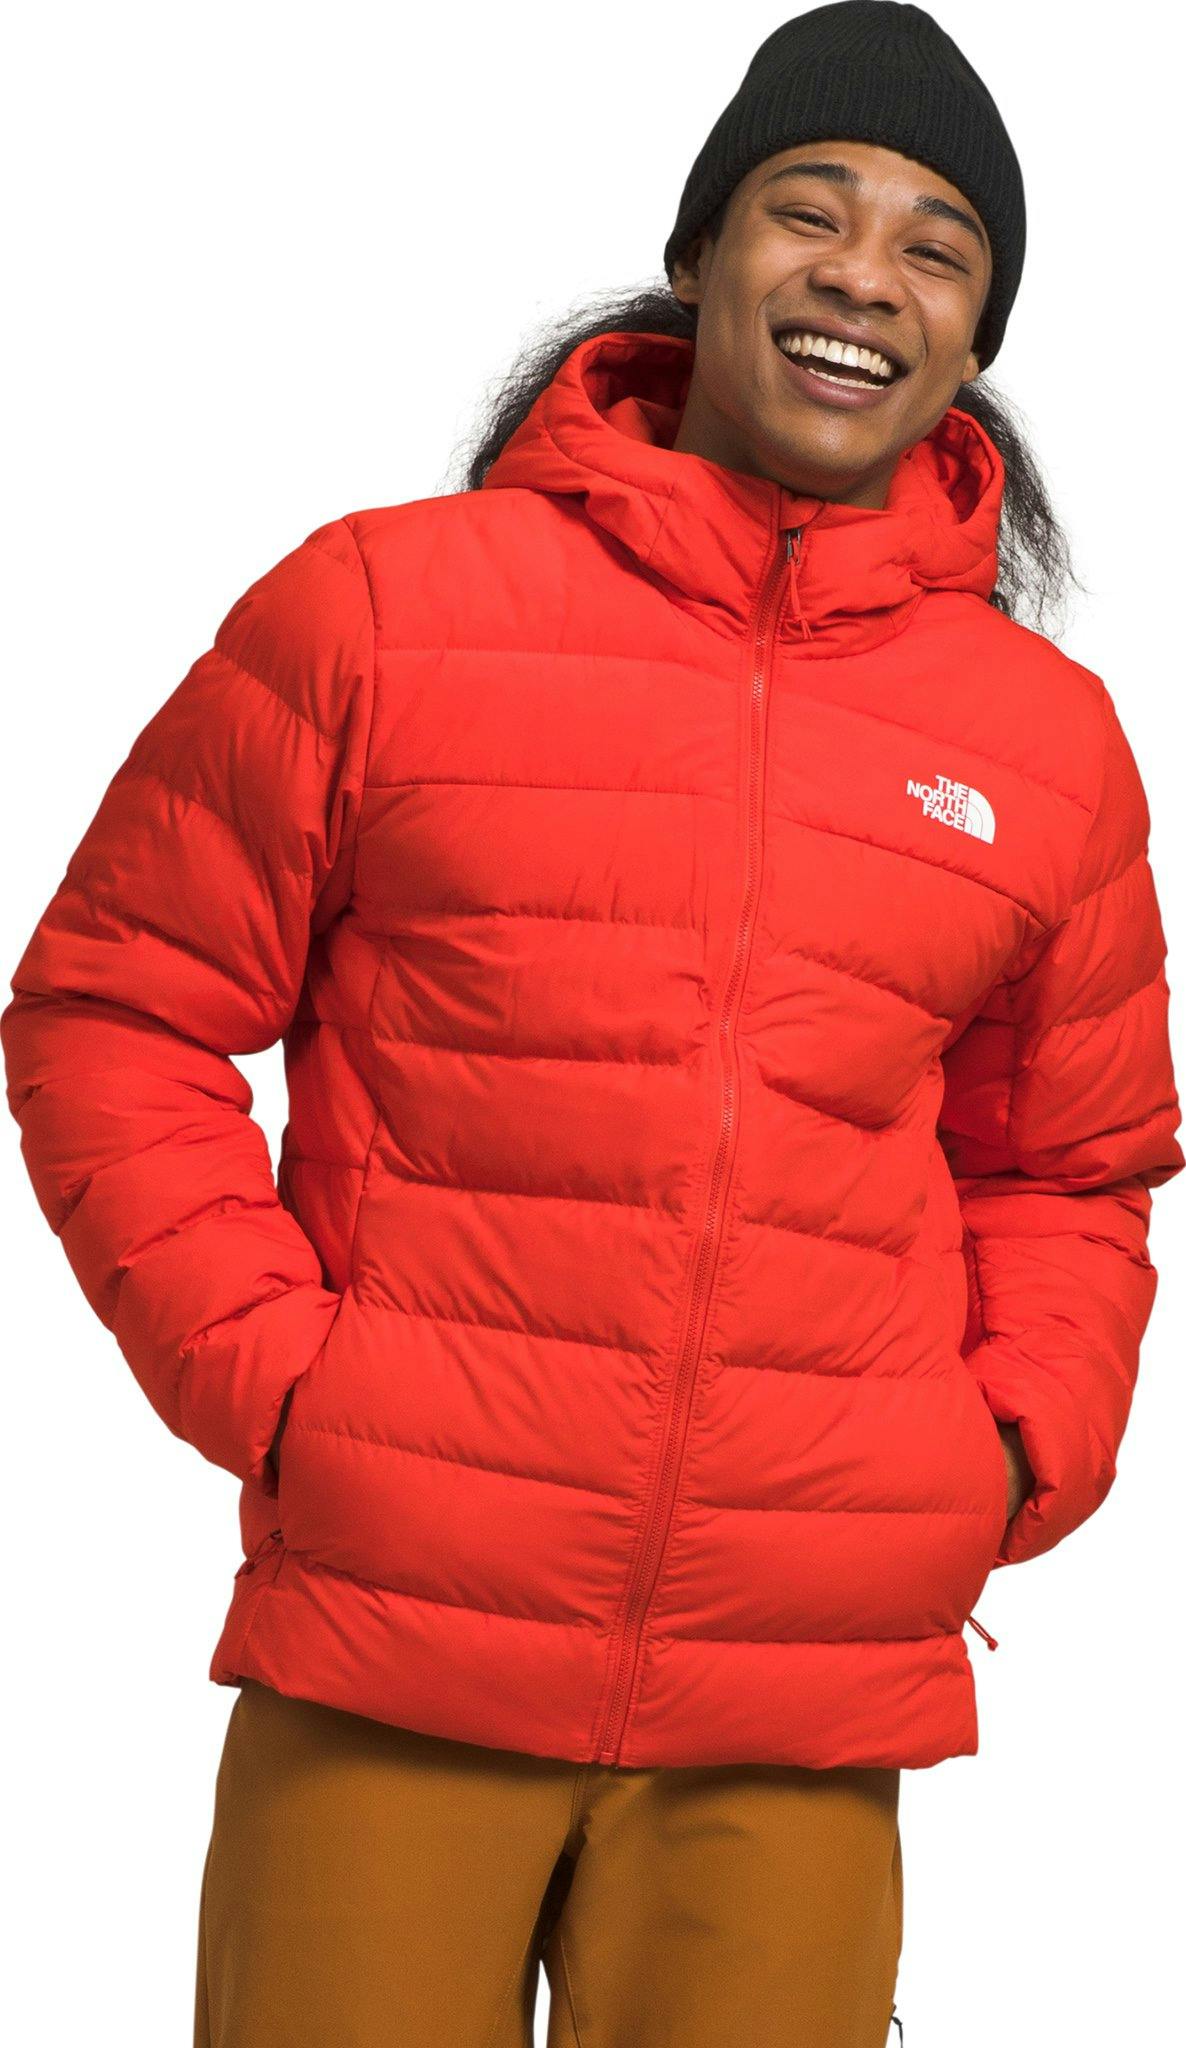 Product image for Aconcagua 3 Hoodie Jacket - Men's